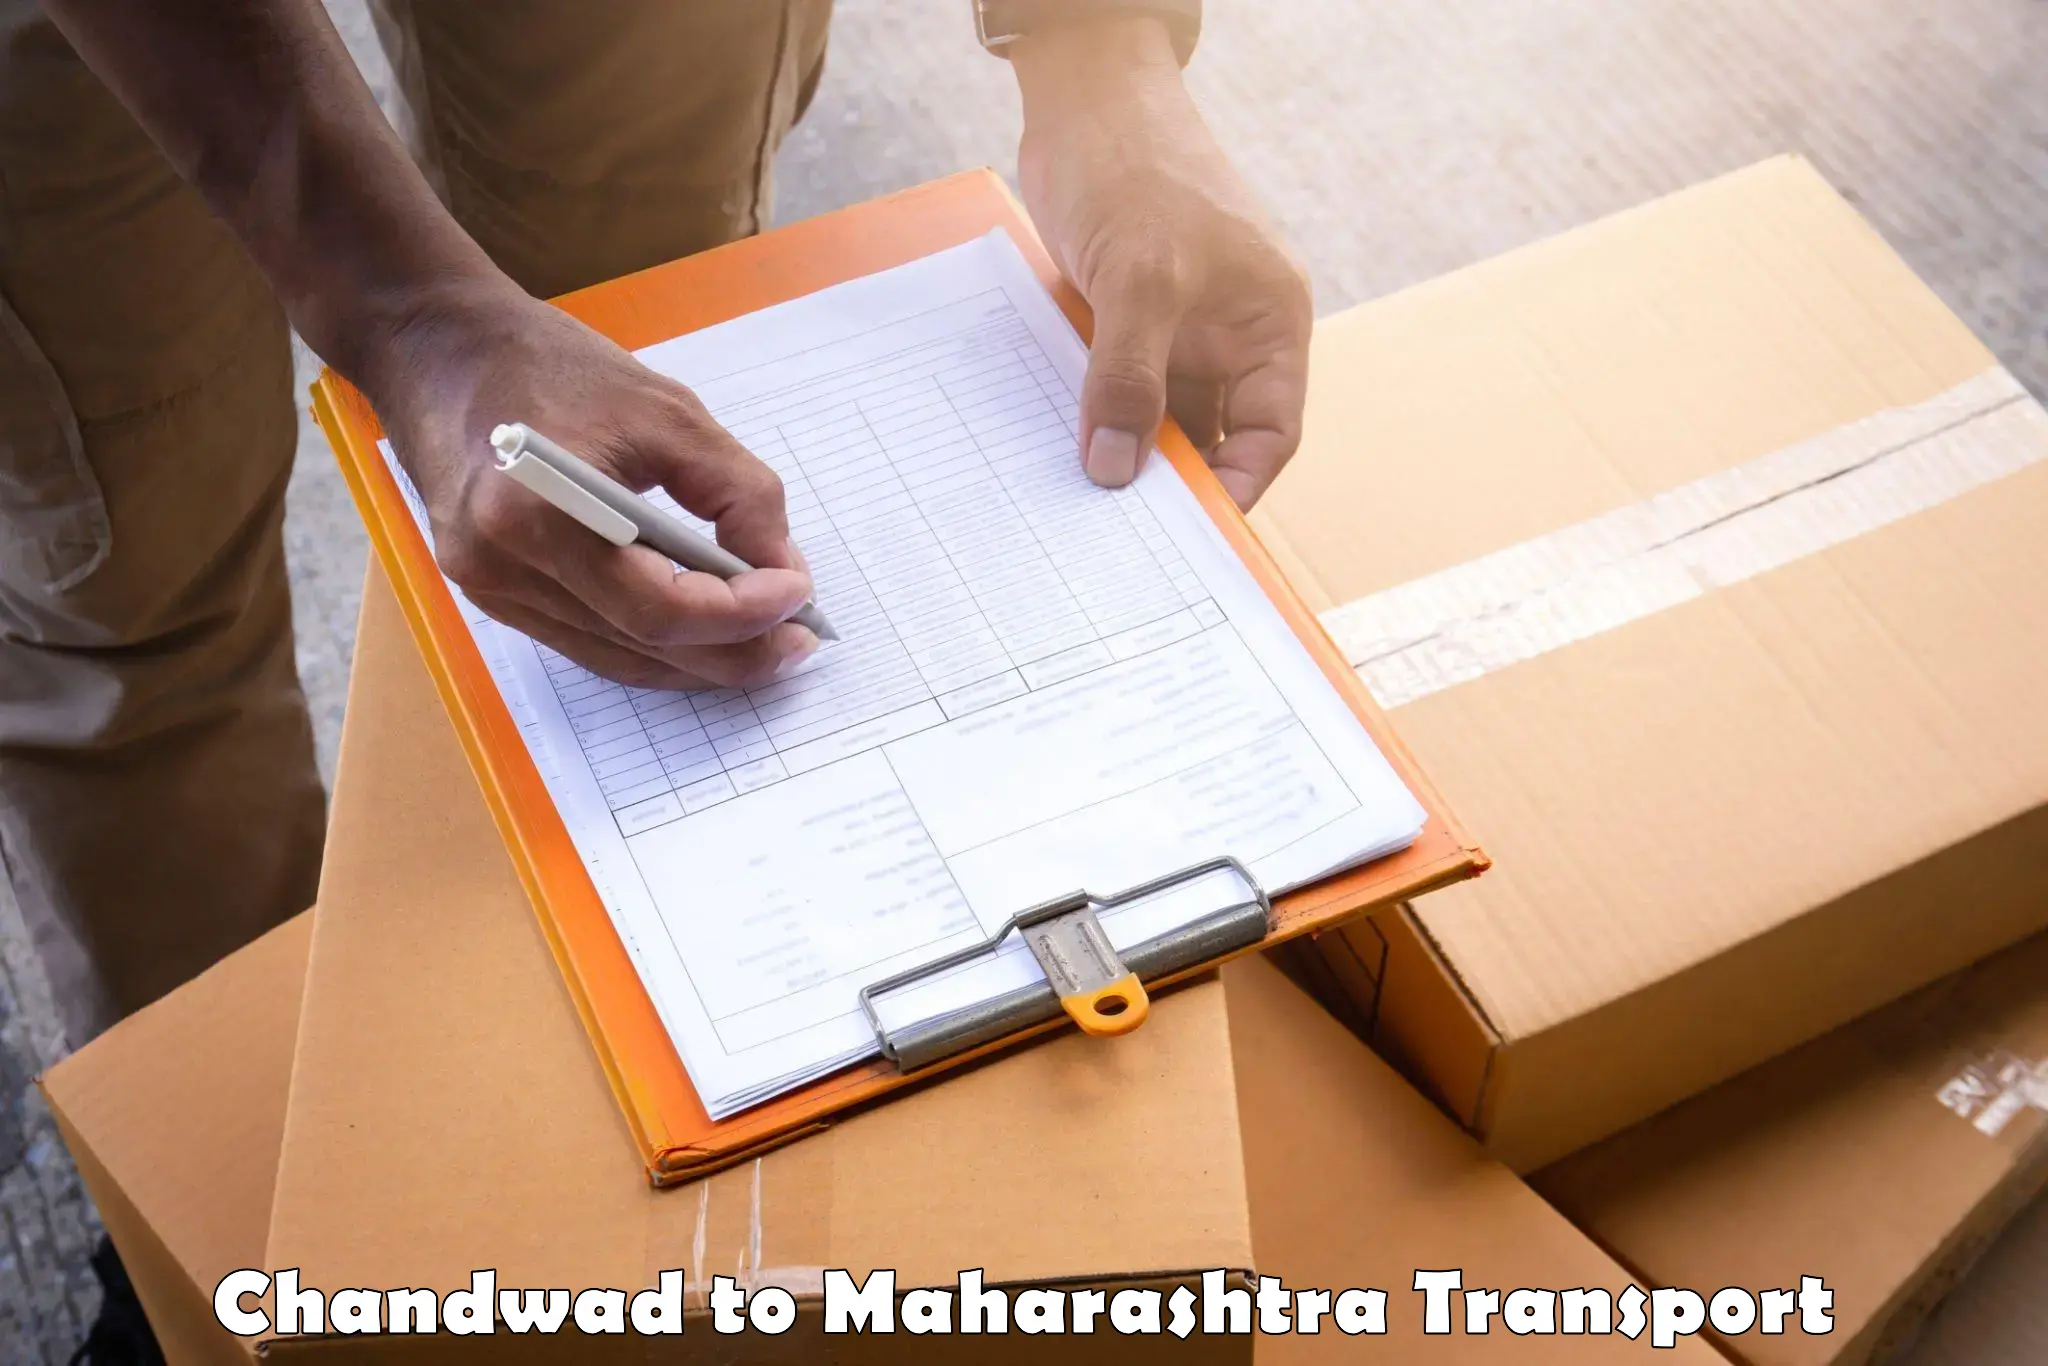 Goods delivery service Chandwad to Chiplun